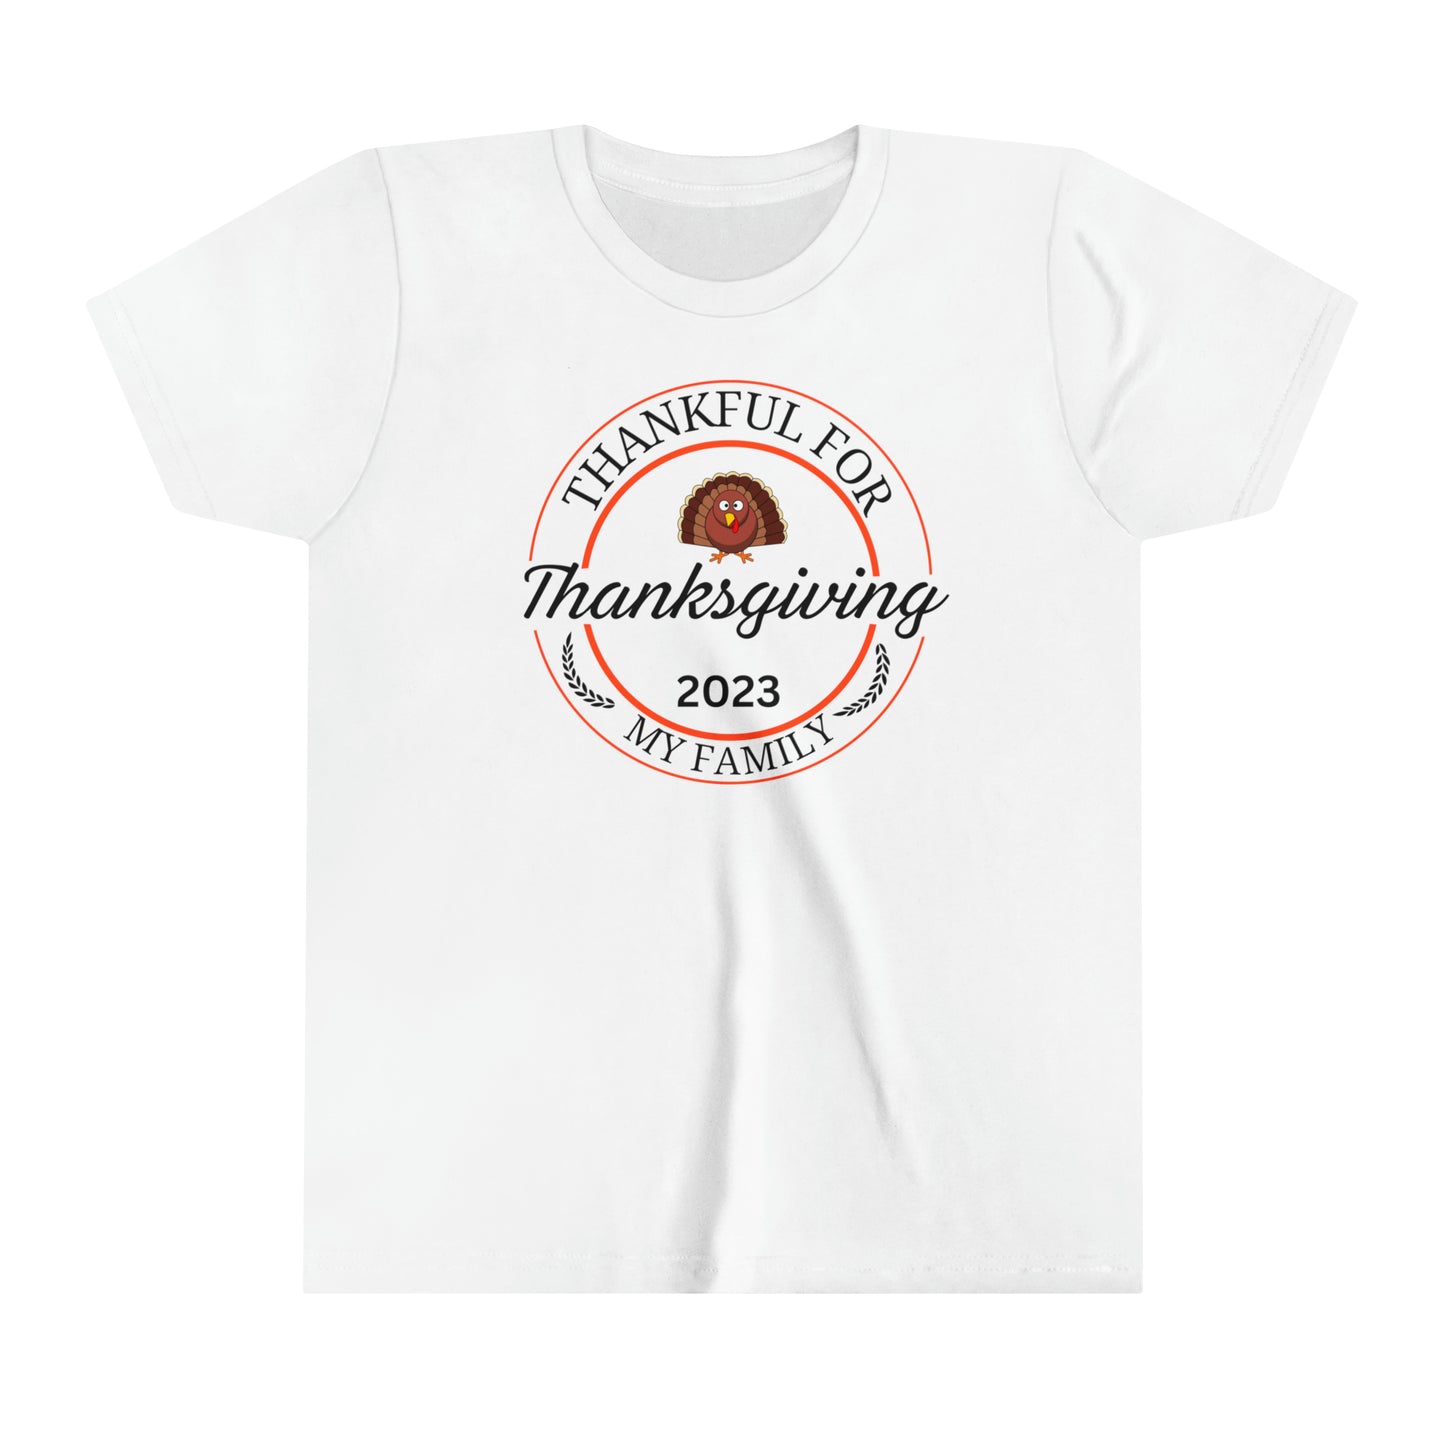 Youth - Thankful Group Thanksgiving 2023 Shirts, Family T-shirt, Friend shirts, Youth Shirts, Thanksgiving Shirt for Kids